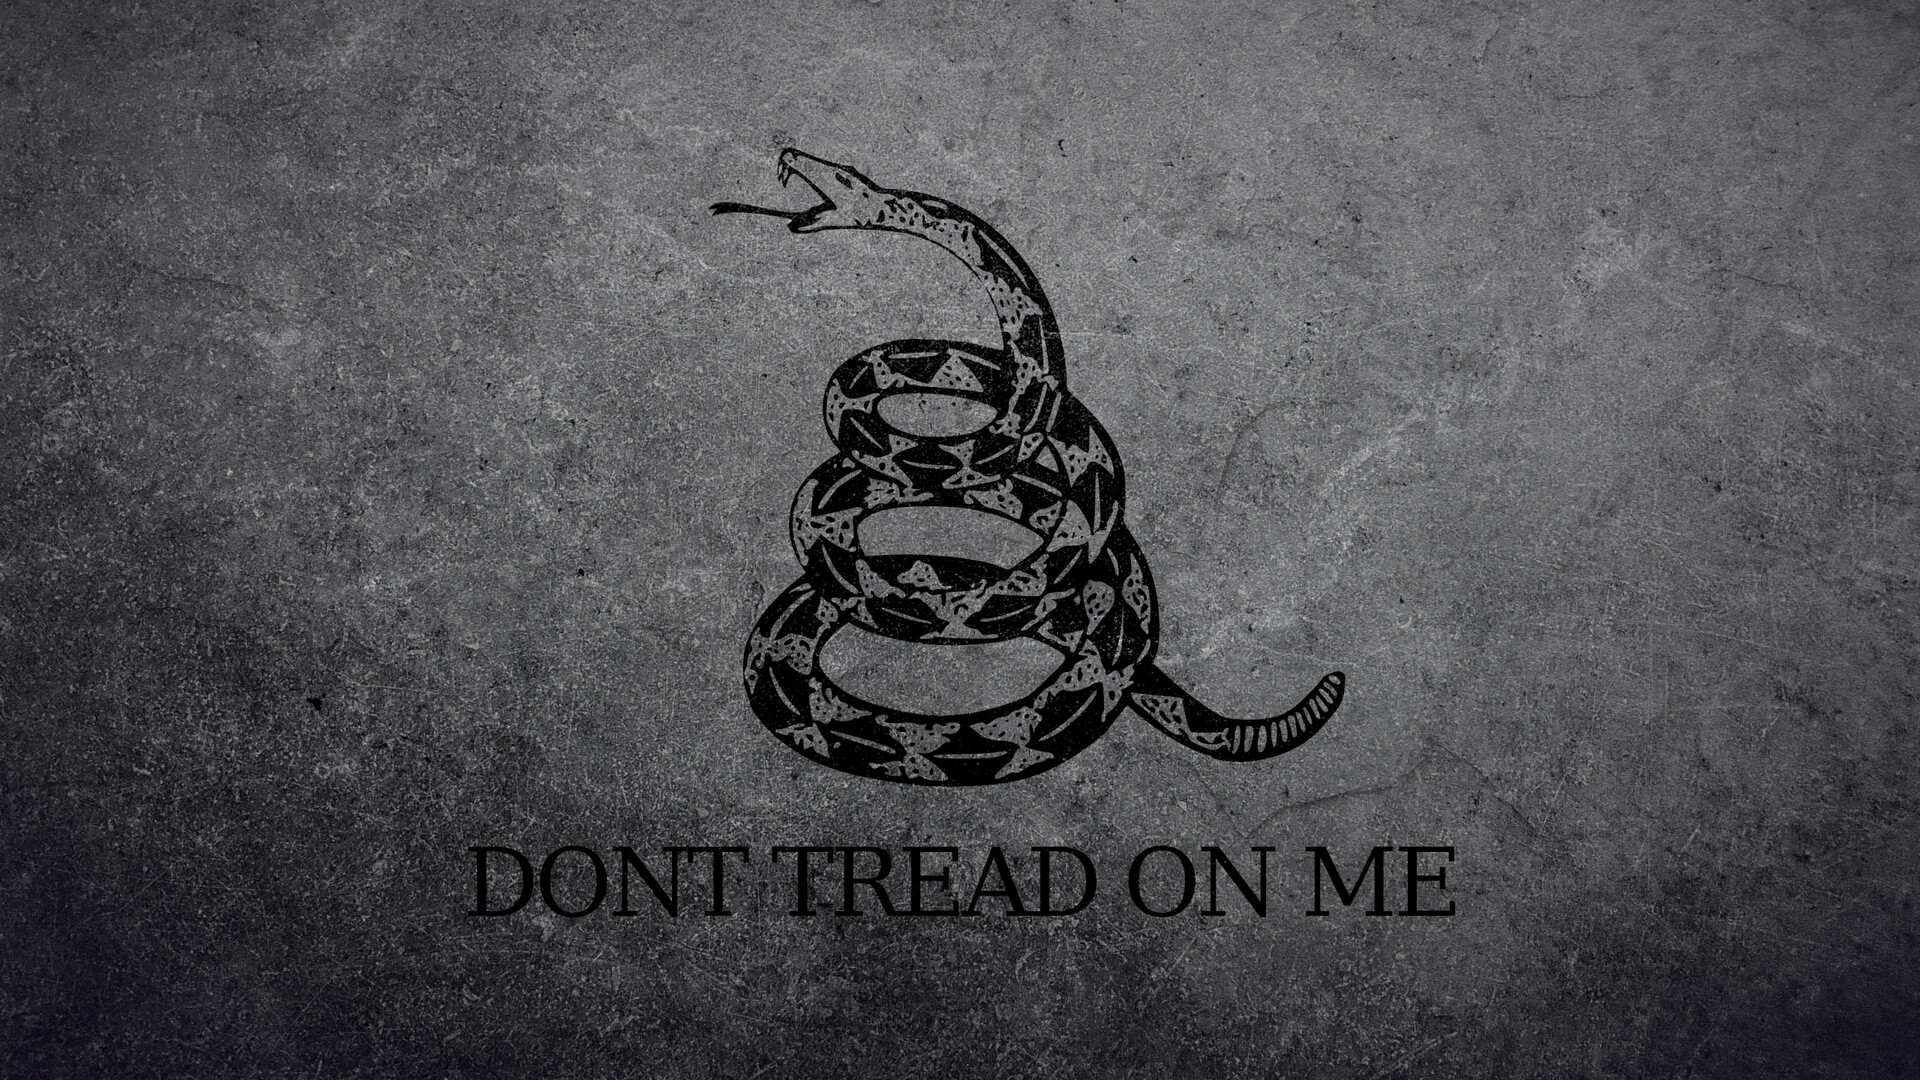 Top 69+ dont tread on me wallpaper latest - in.cdgdbentre